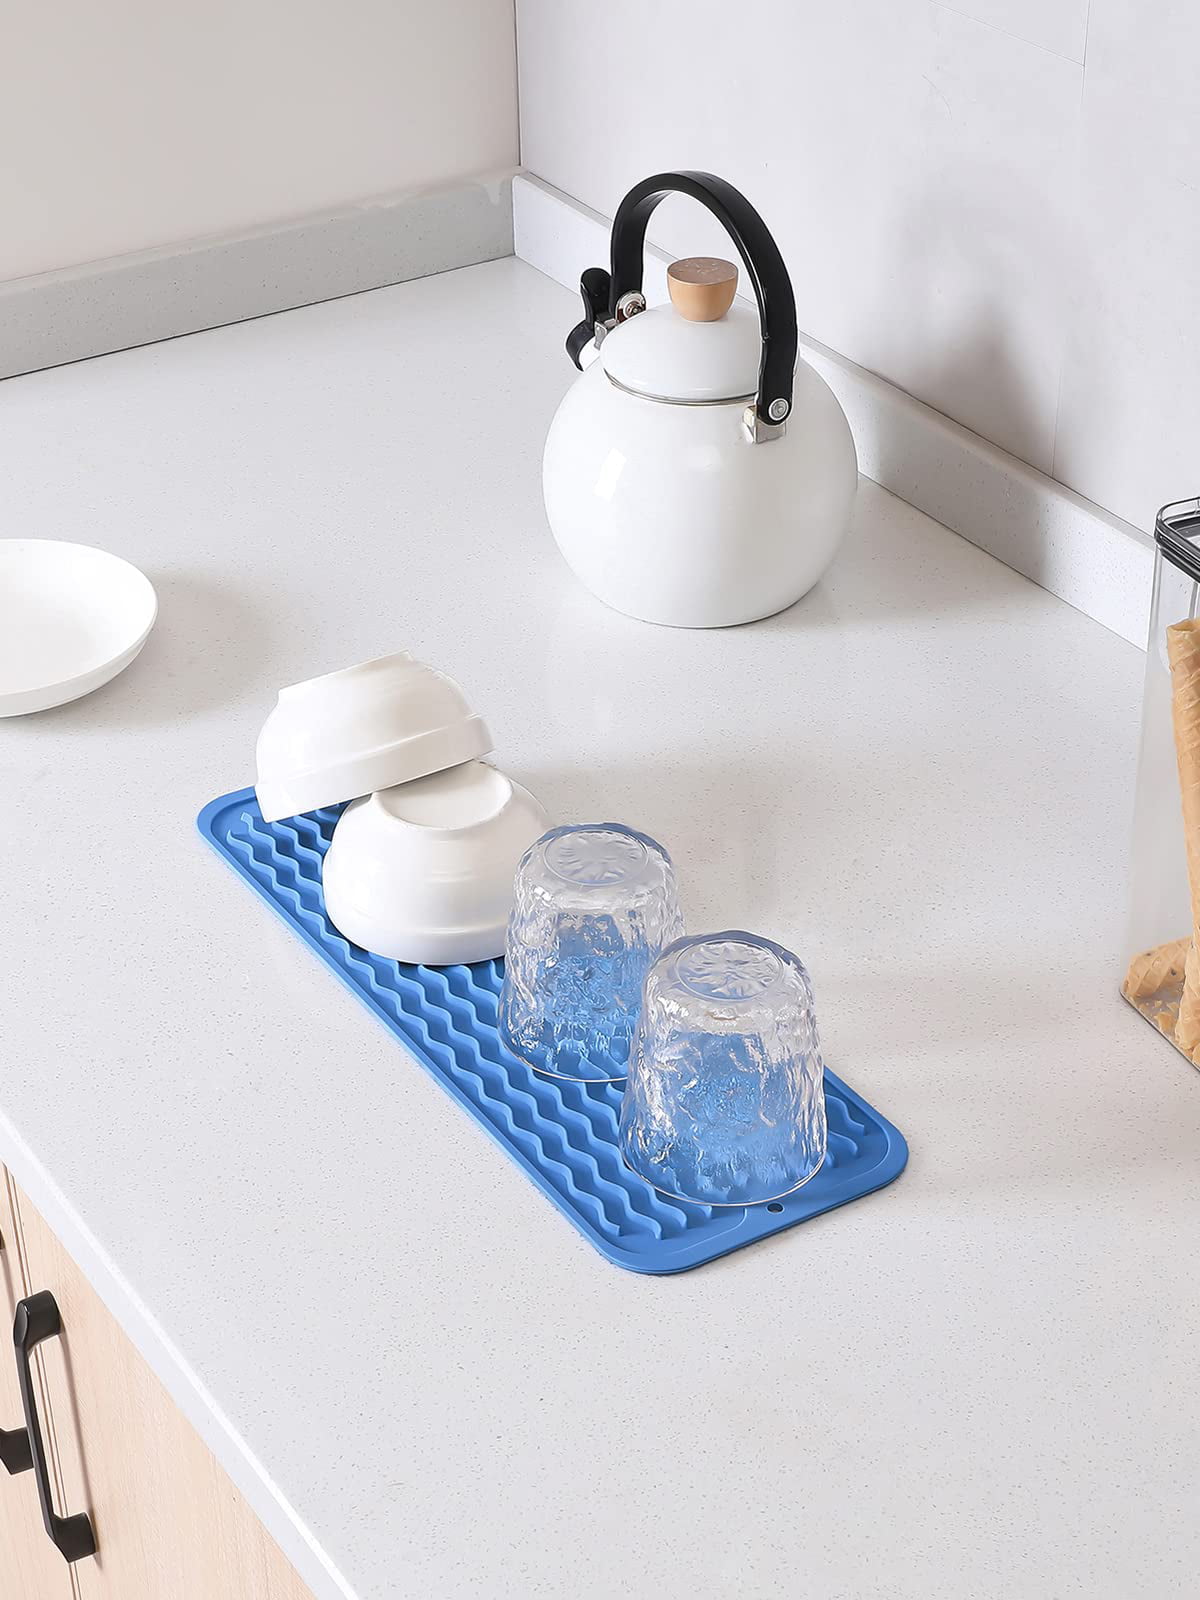 Silicone Drying Mat for Kitchen Counter – 12 x 15.8 Dish Mat Set with  Silicone Sponge Keeps Countertops Dry – Dishwasher-Safe Silicone Dish  Drying